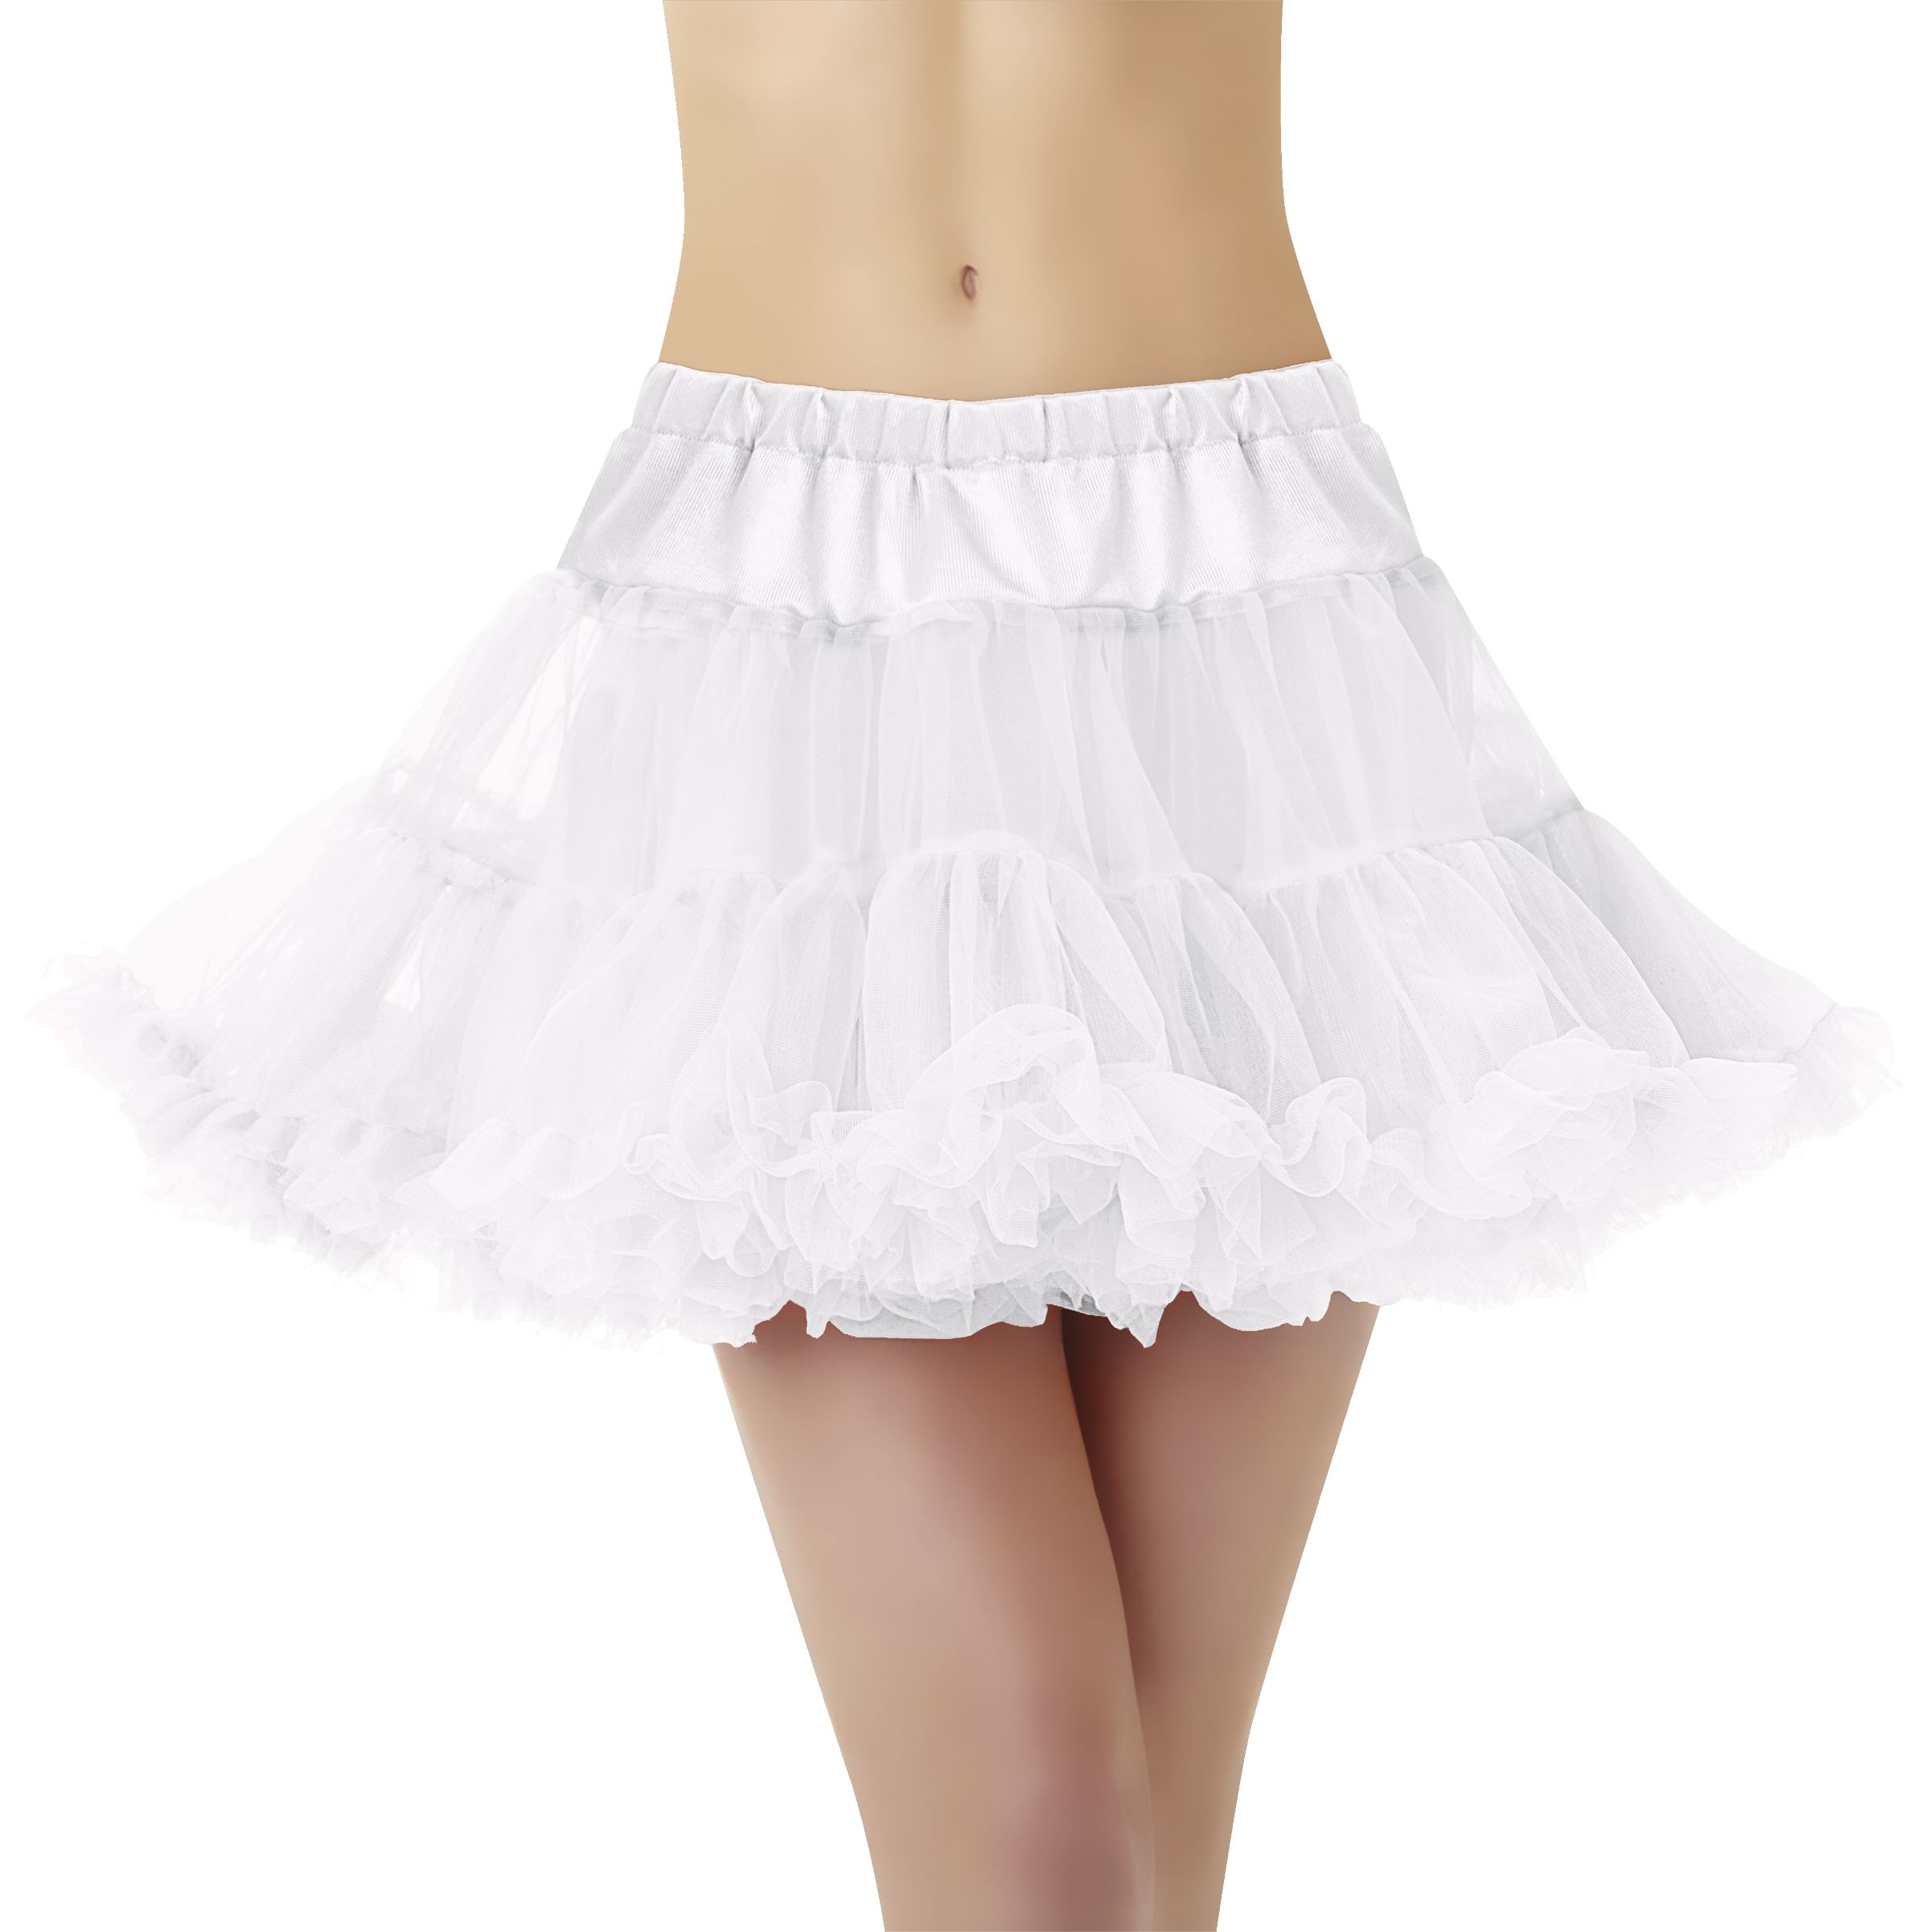 Adult Tulle Petticoat Skirt, White, One Size, Wearable Costume Accessory  for Halloween